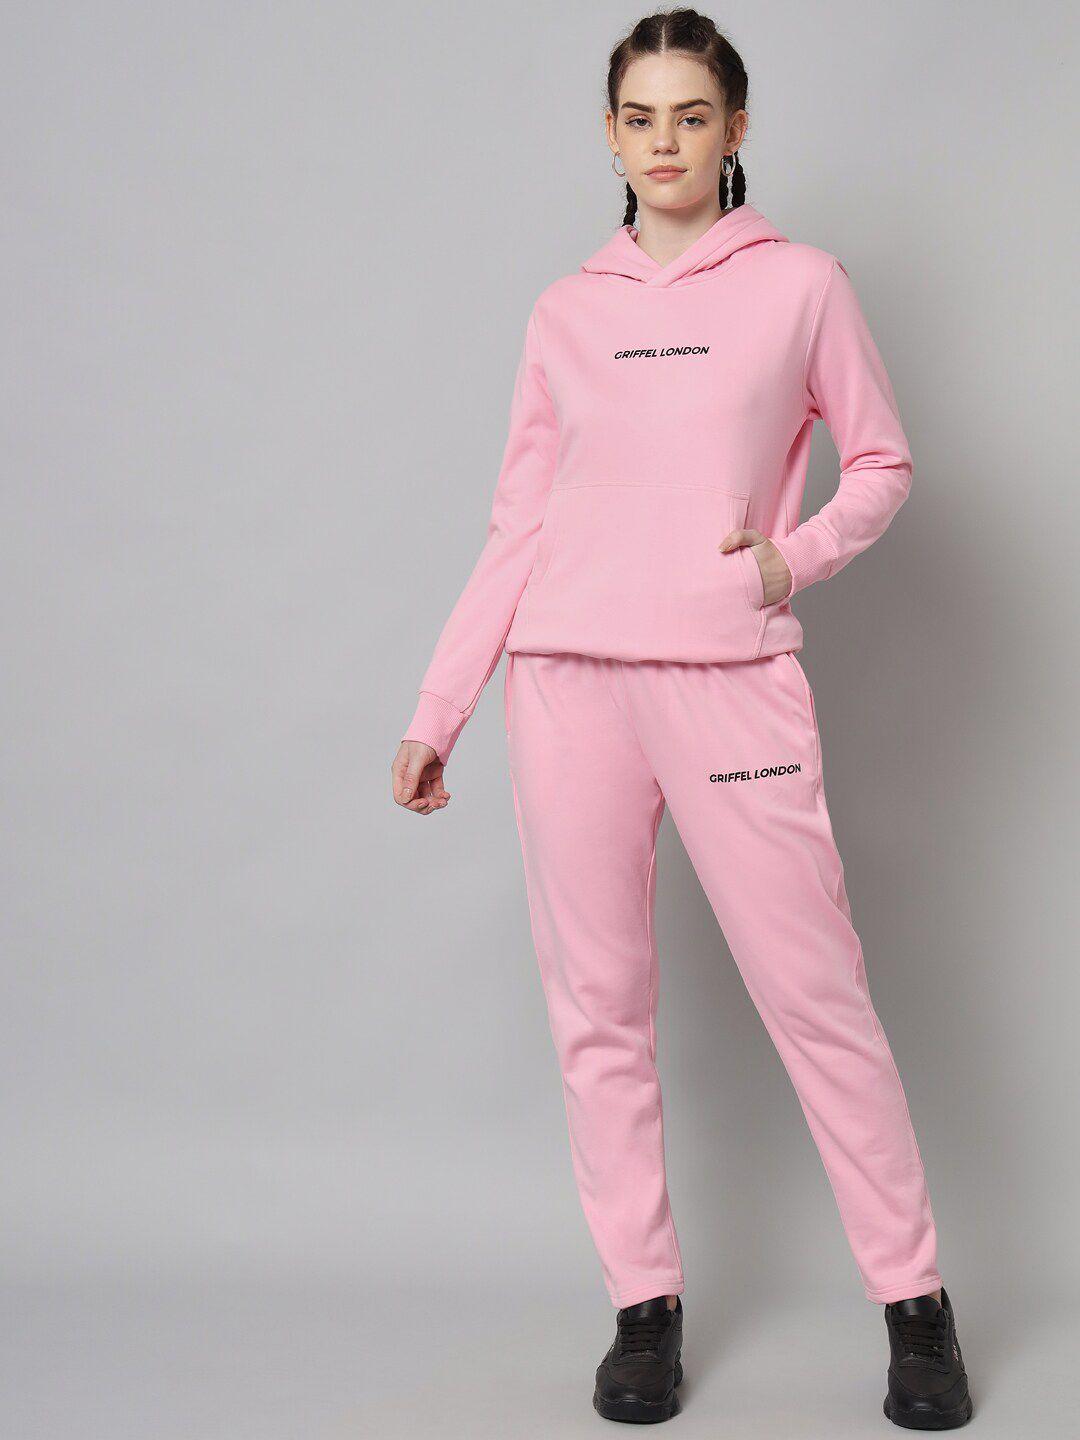 griffel women pink solid tracksuit